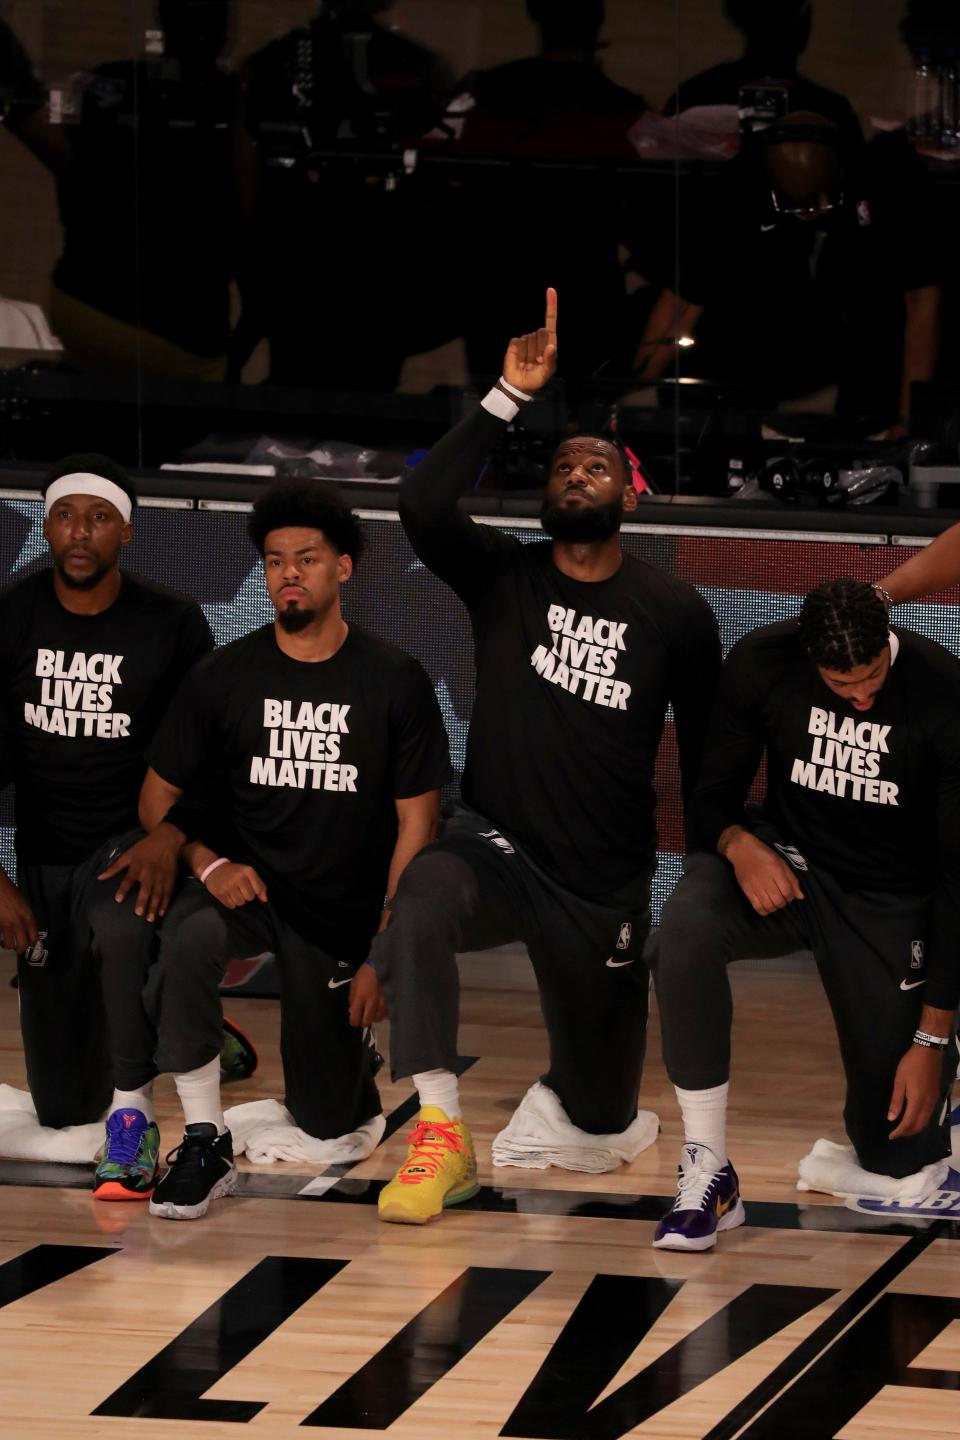 Los Angeles Lakers' LeBron James wears a Black Lives Matter shirt as he points up and kneels with teammates during the national anthem prior to an NBA basketball game against the Los Angeles Clippers, Thursday, July 30, 2020, in Lake Buena Vista, Fla. (Mike Ehrmann/Getty Images via AP, Pool)